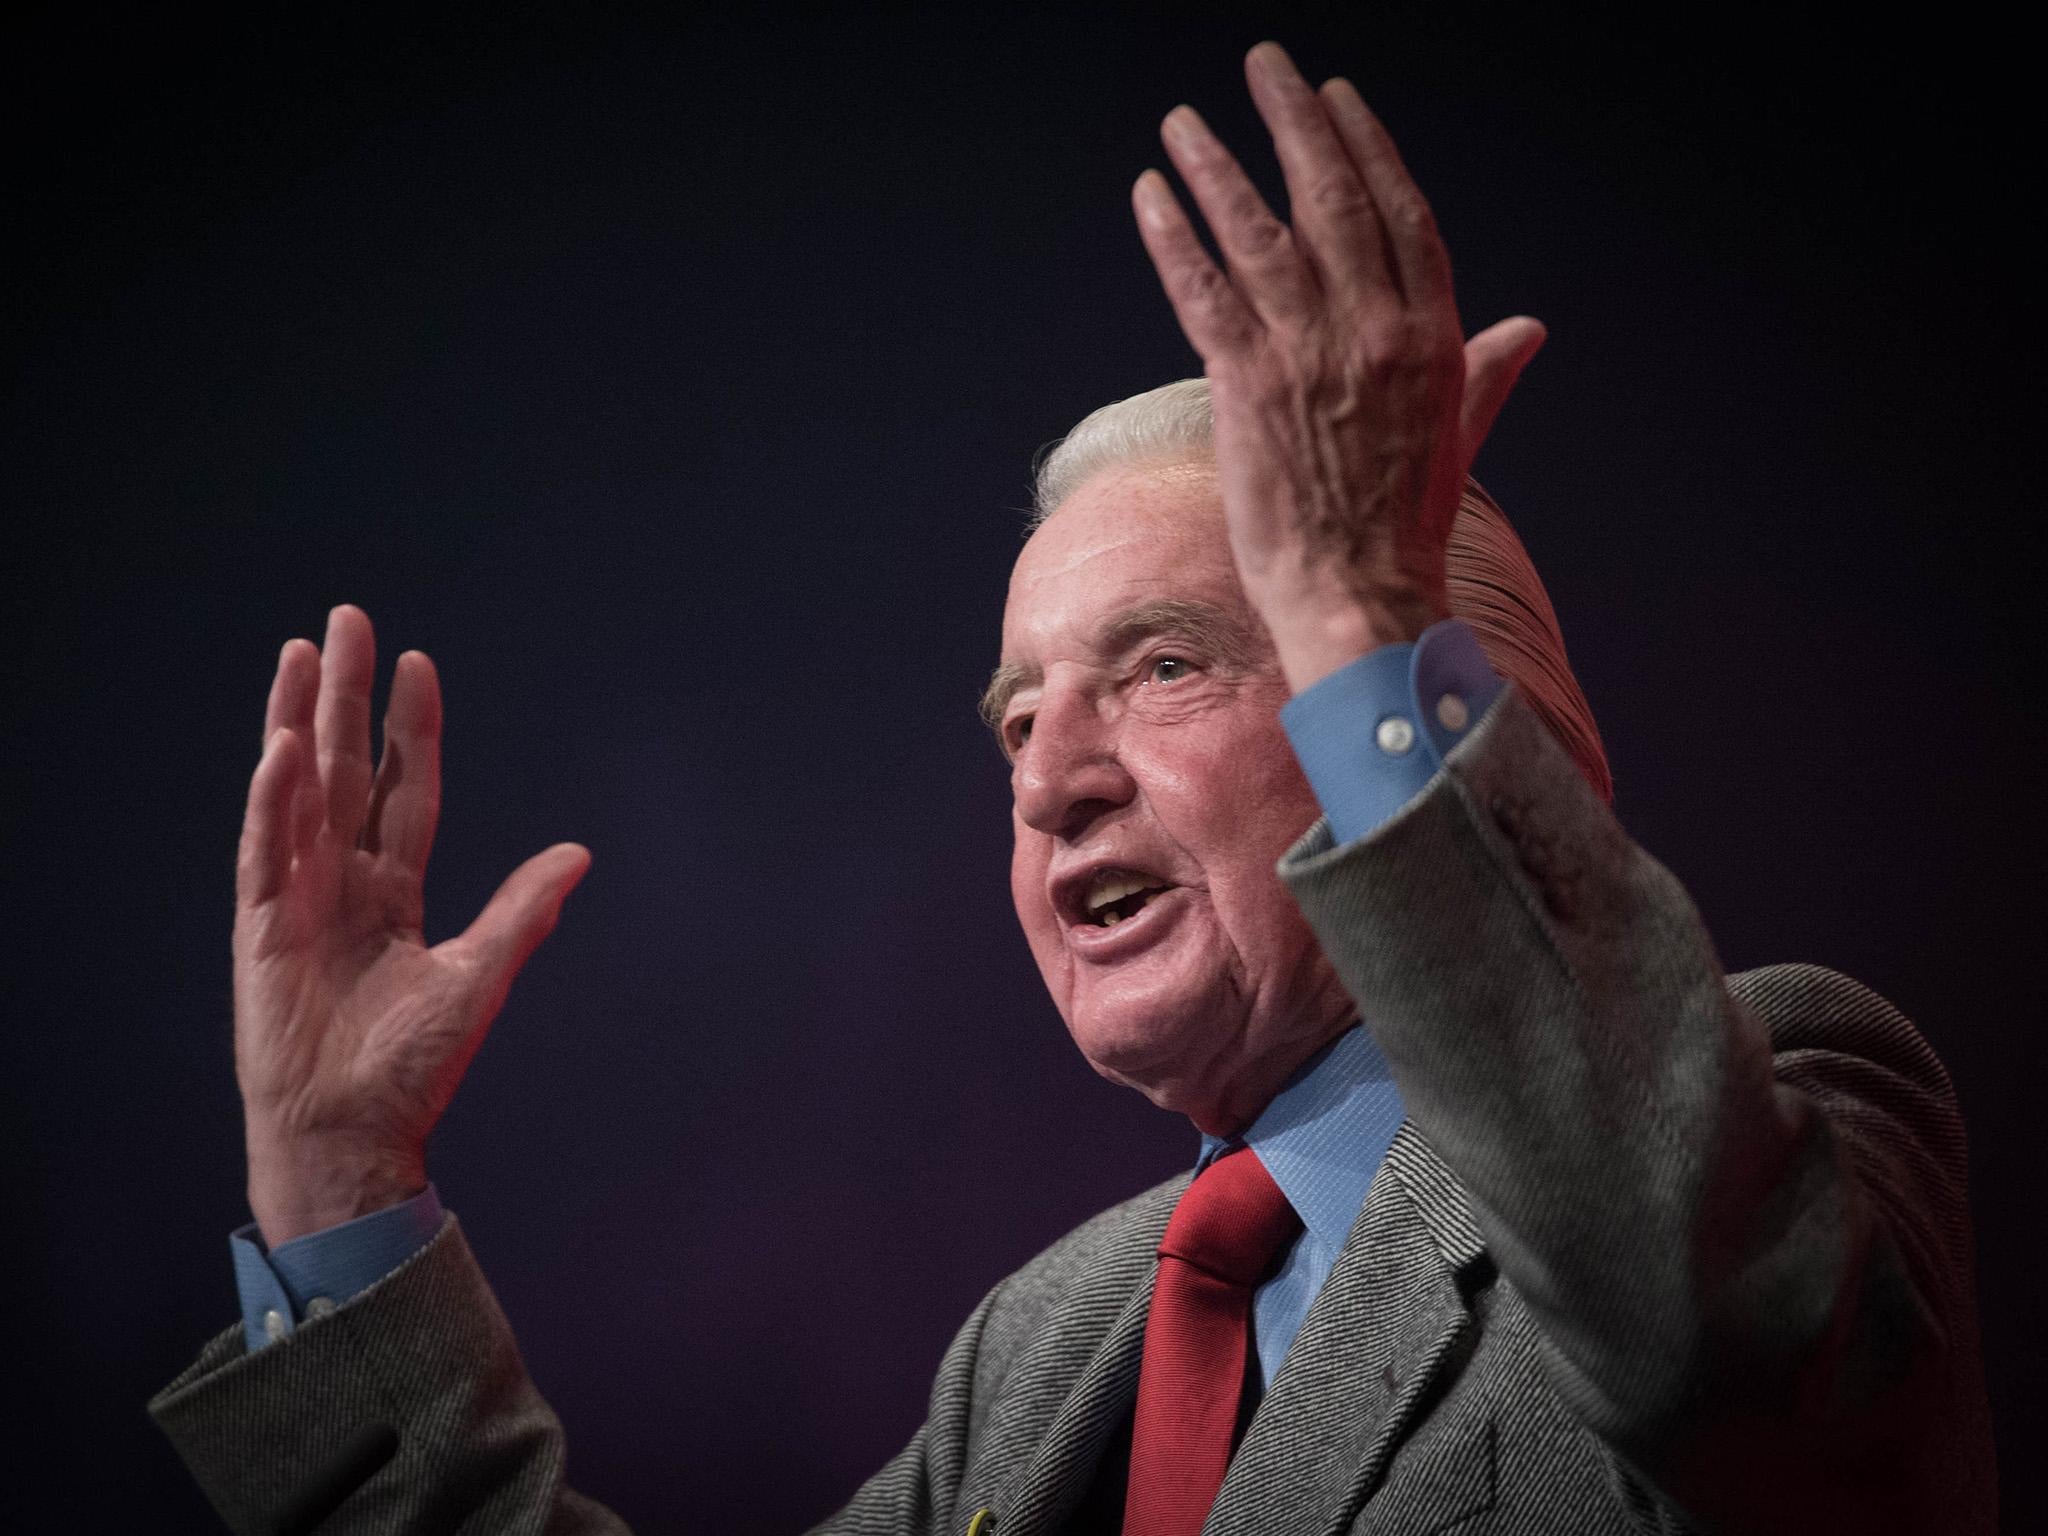 Dennis Skinner hailed a 'tremendous' year for Labour and credited Jeremy Corbyn's leadership